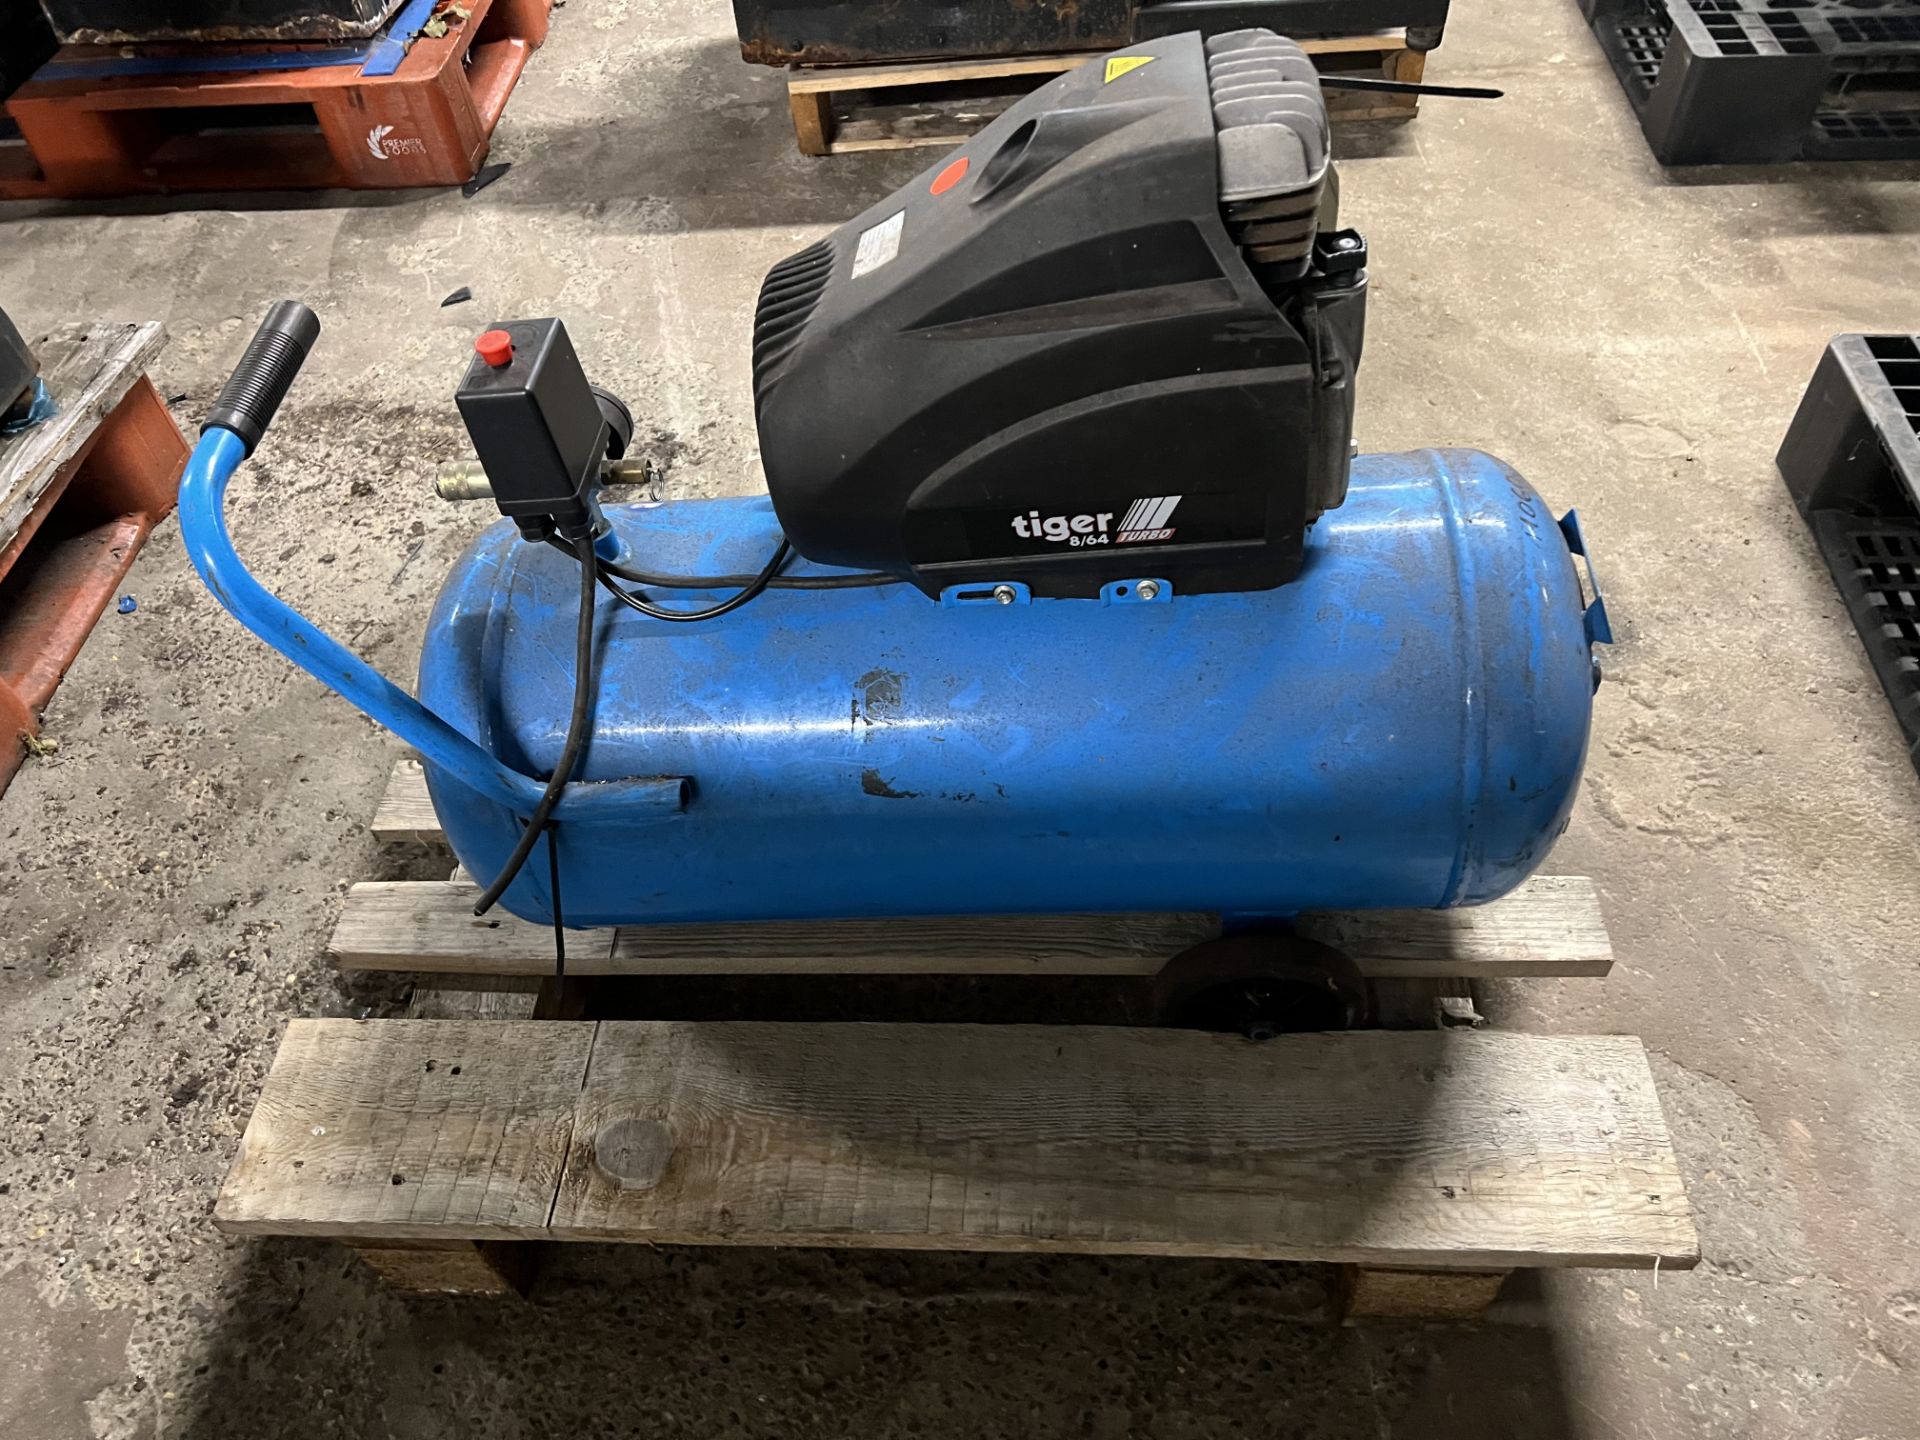 Airmaster Tiger 8/64 Turbo Compressor, lift out charge - £20 + VAT, lot located in Bury St - Image 3 of 3